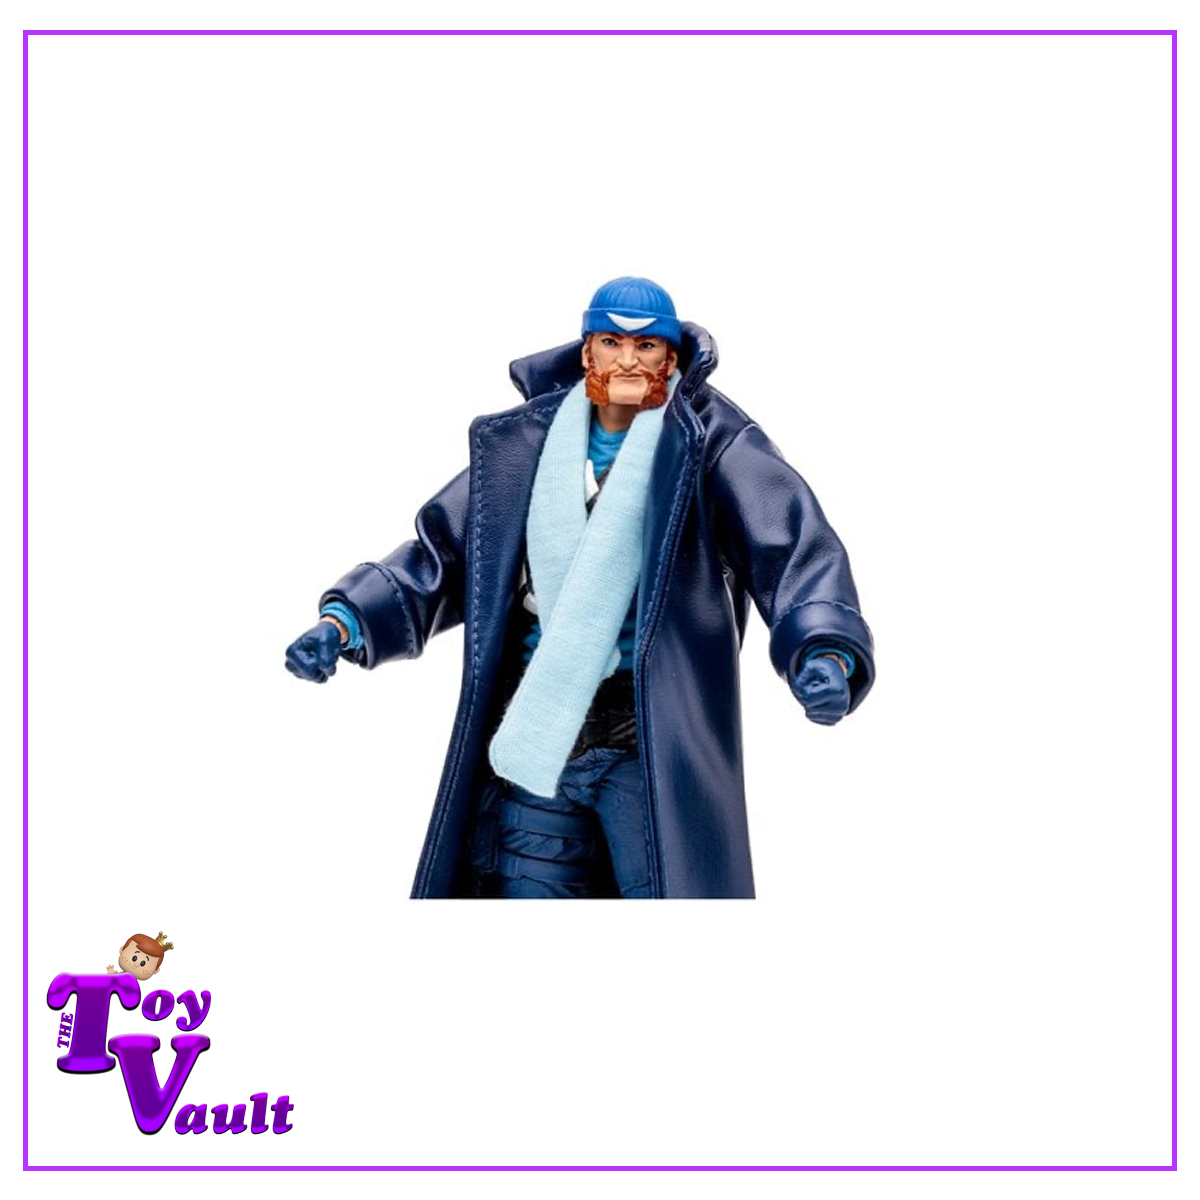 McFarlane Toys DC Heroes Collector Edition Captain Boomerang The Flash 7-inch Scale Action Figure Preorder